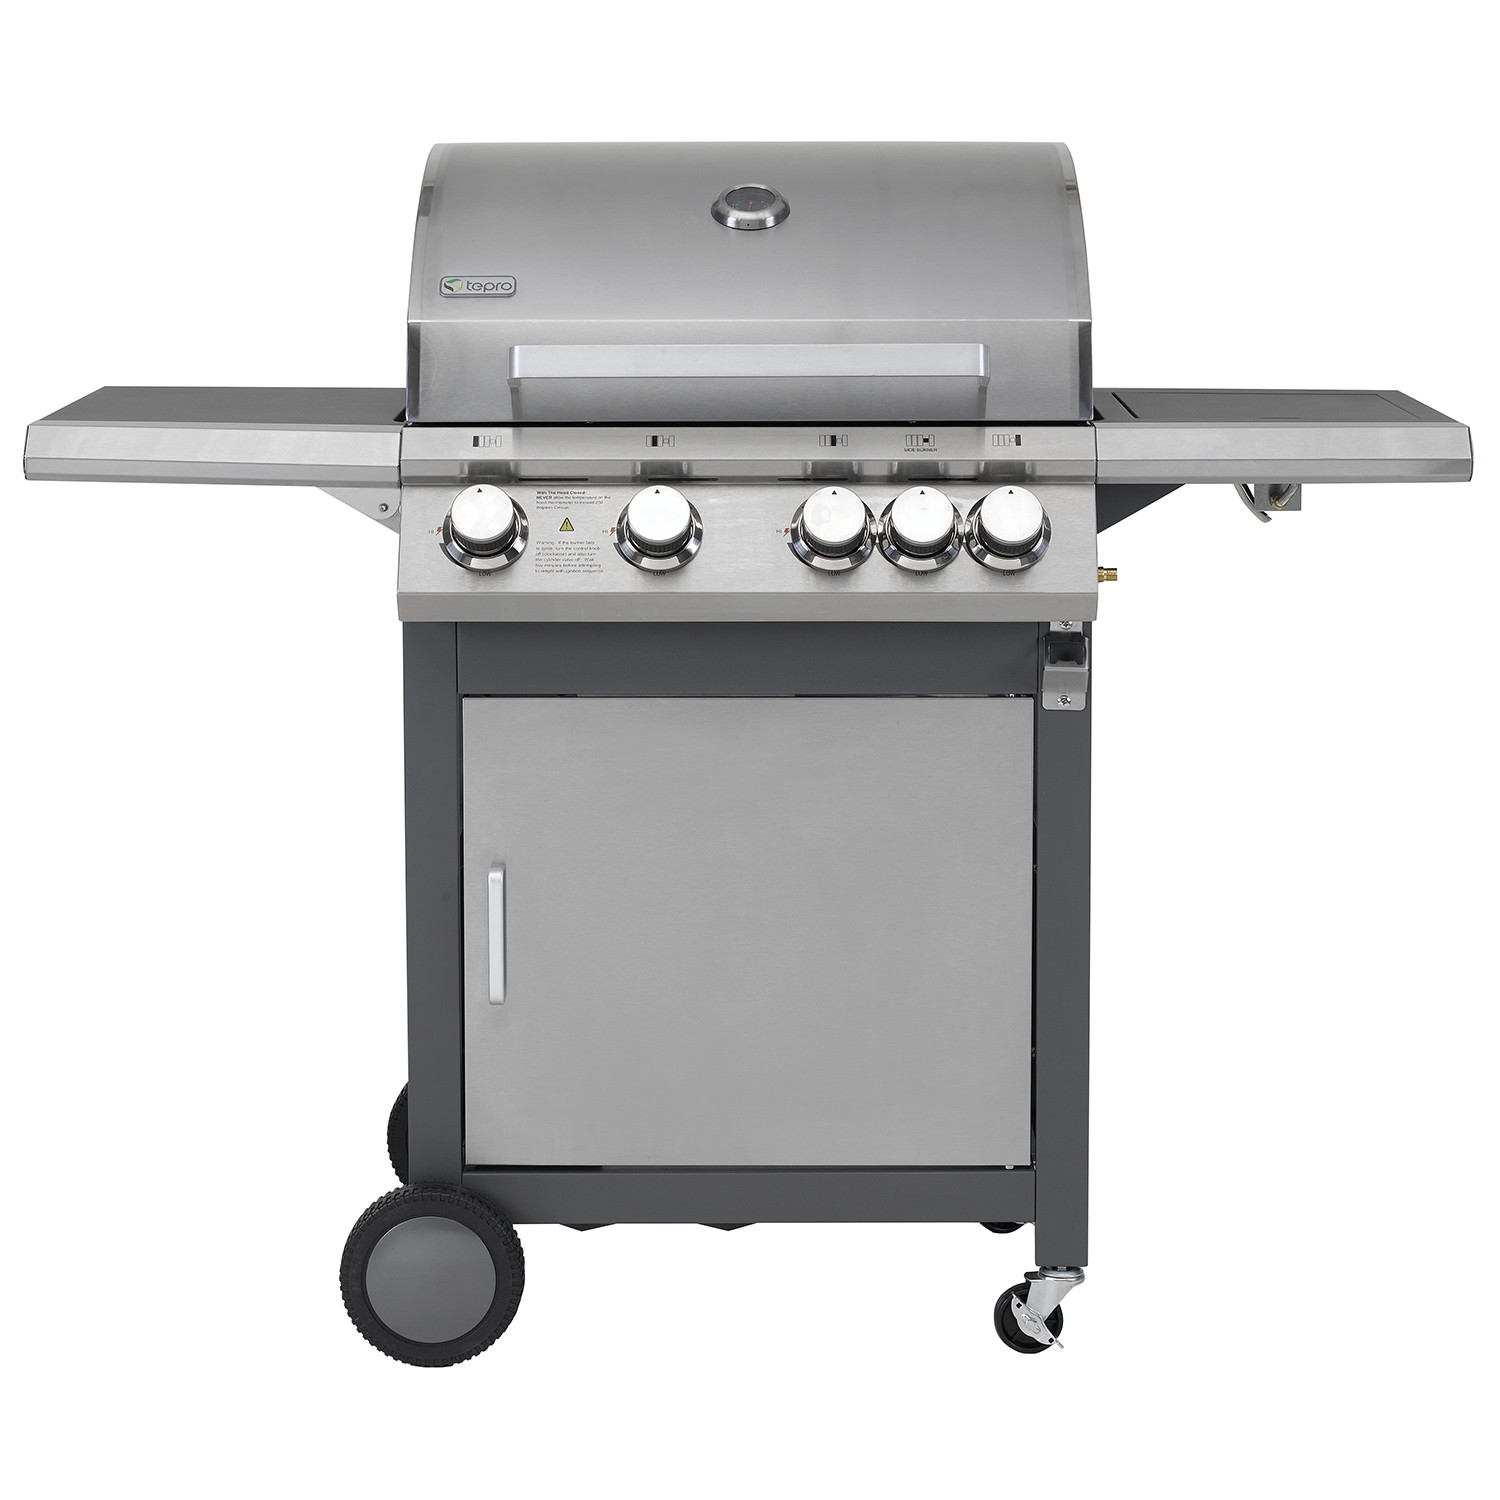 Rockland Gas Grill BBQ Image 2